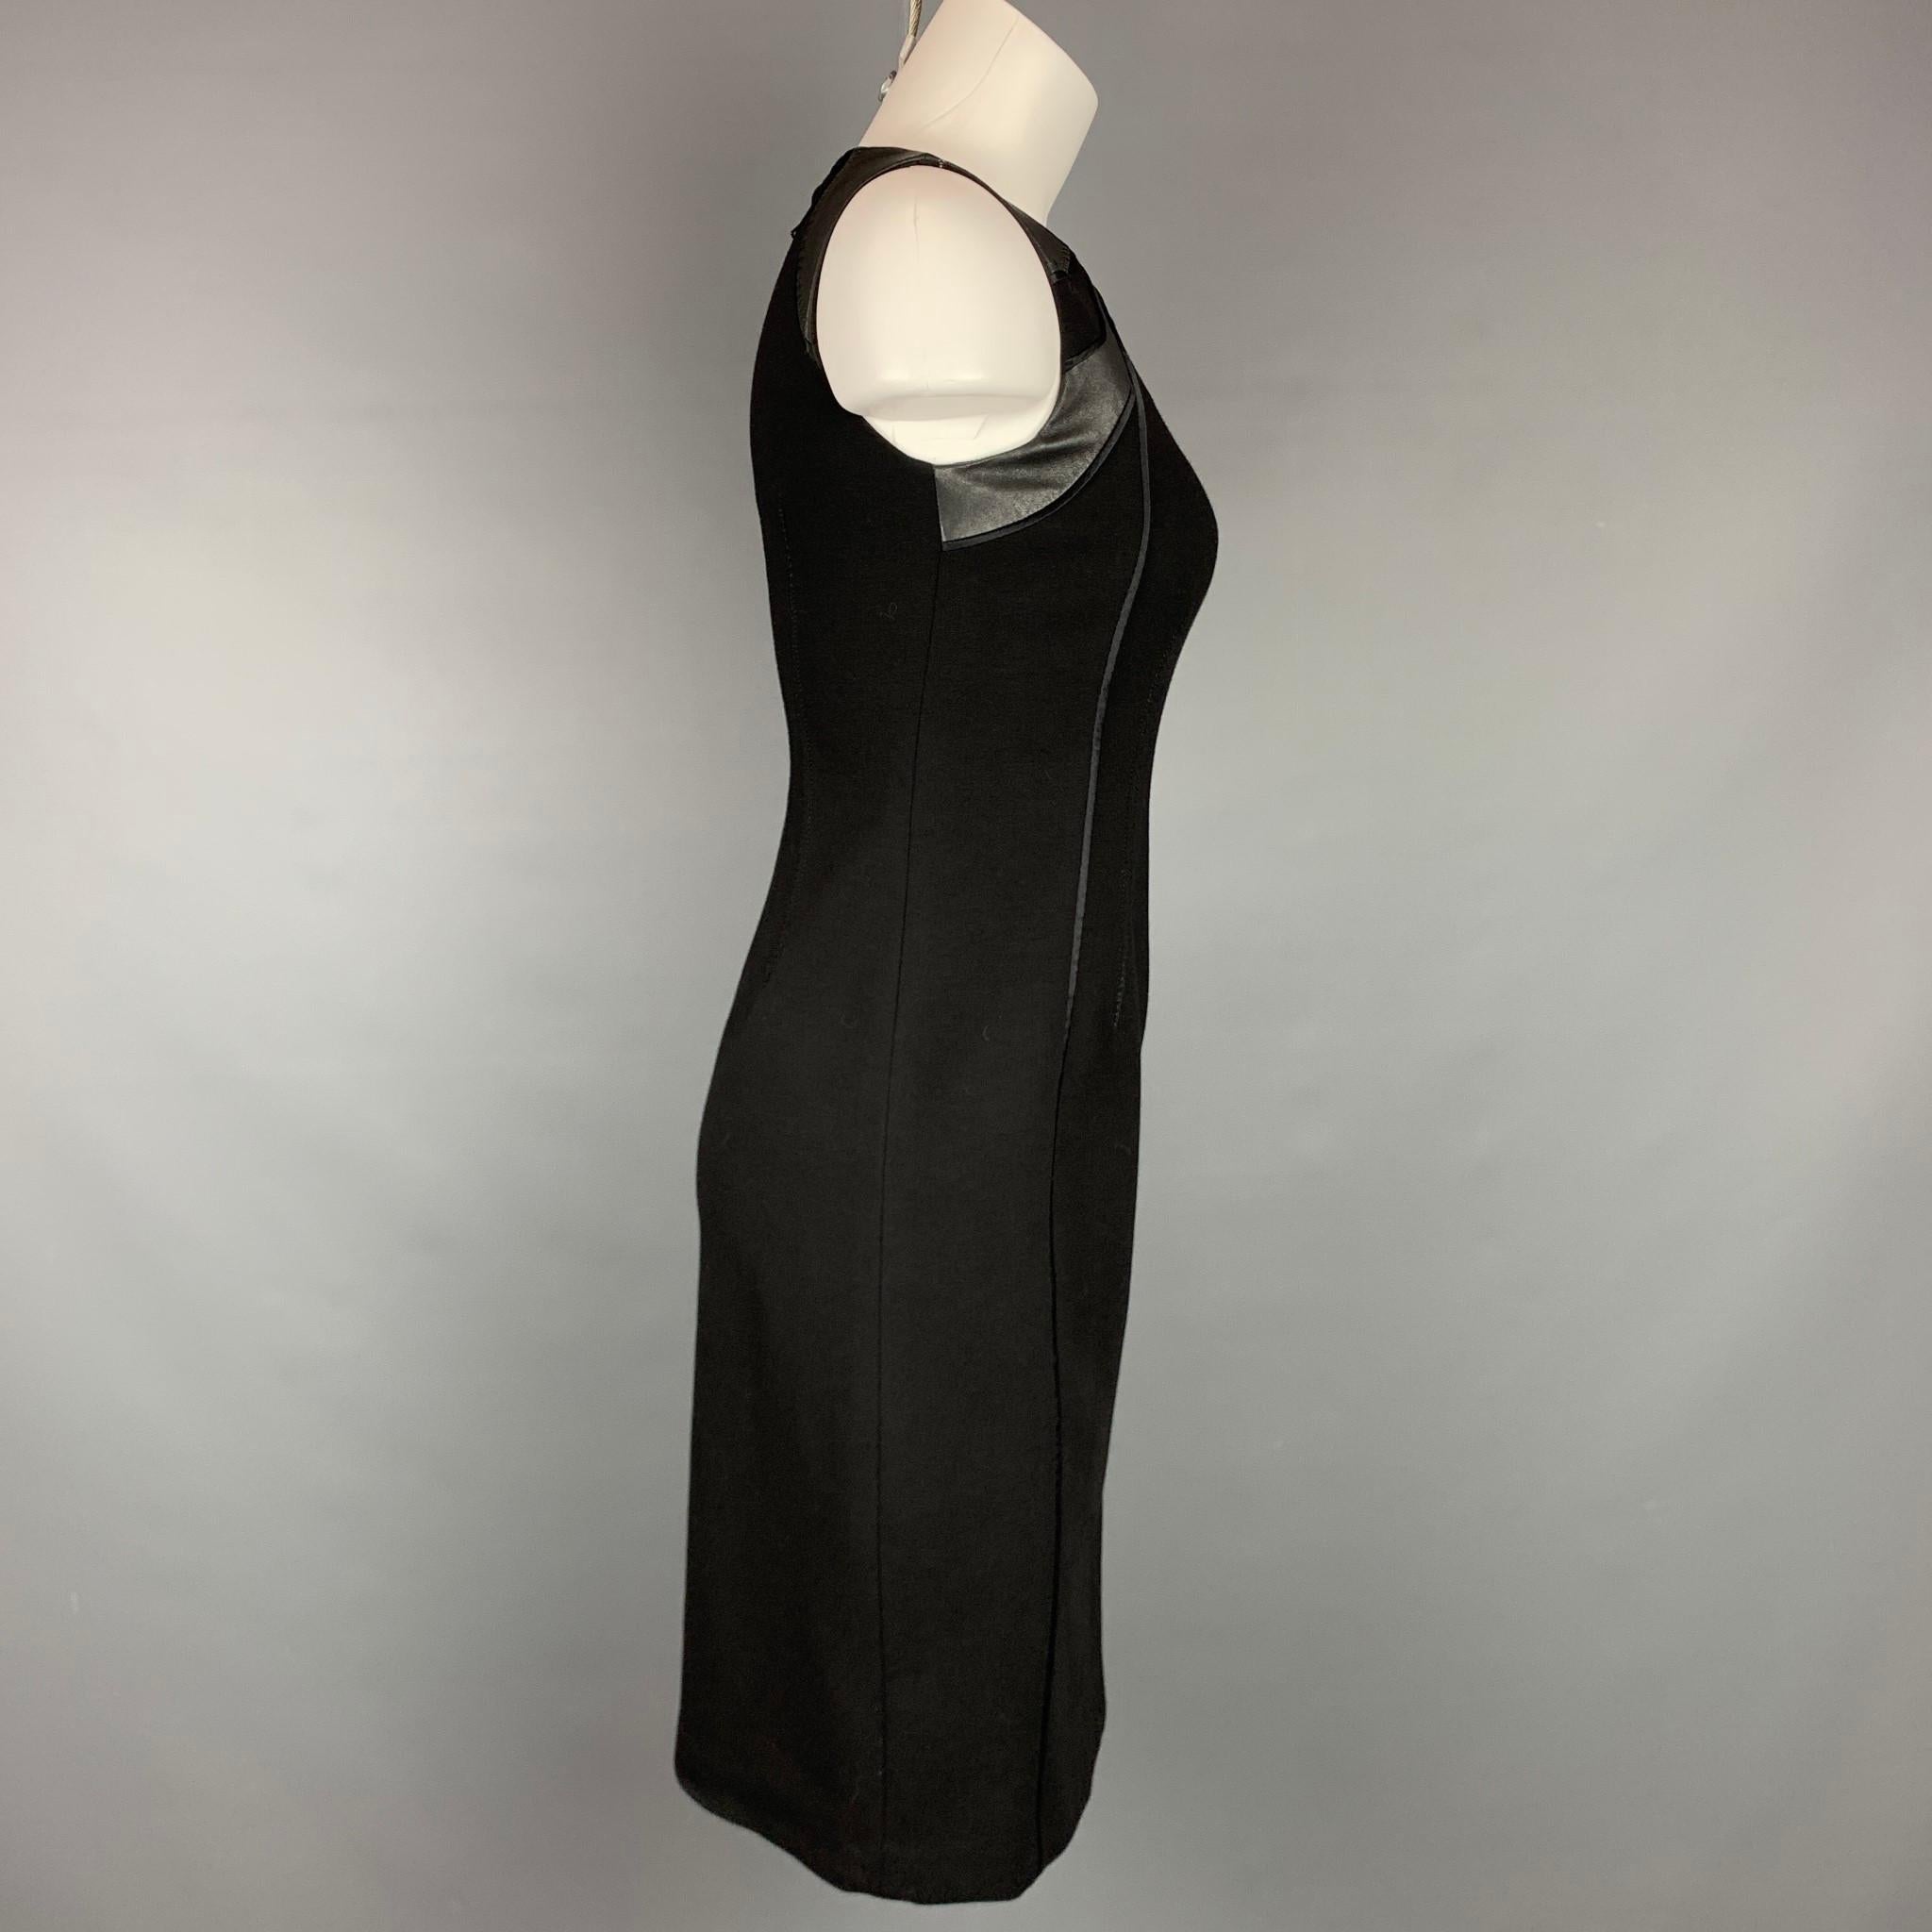 ELIE TAHARI dress comes in a black viscose blend with a leather trim featuring a shift style, sleeveless, top stitching, and a back zipper closure. 

Very Good Pre-Owned Condition.
Marked: US 0

Measurements:

Shoulder: 13 in.
Bust: 30 in.
Waist: 26